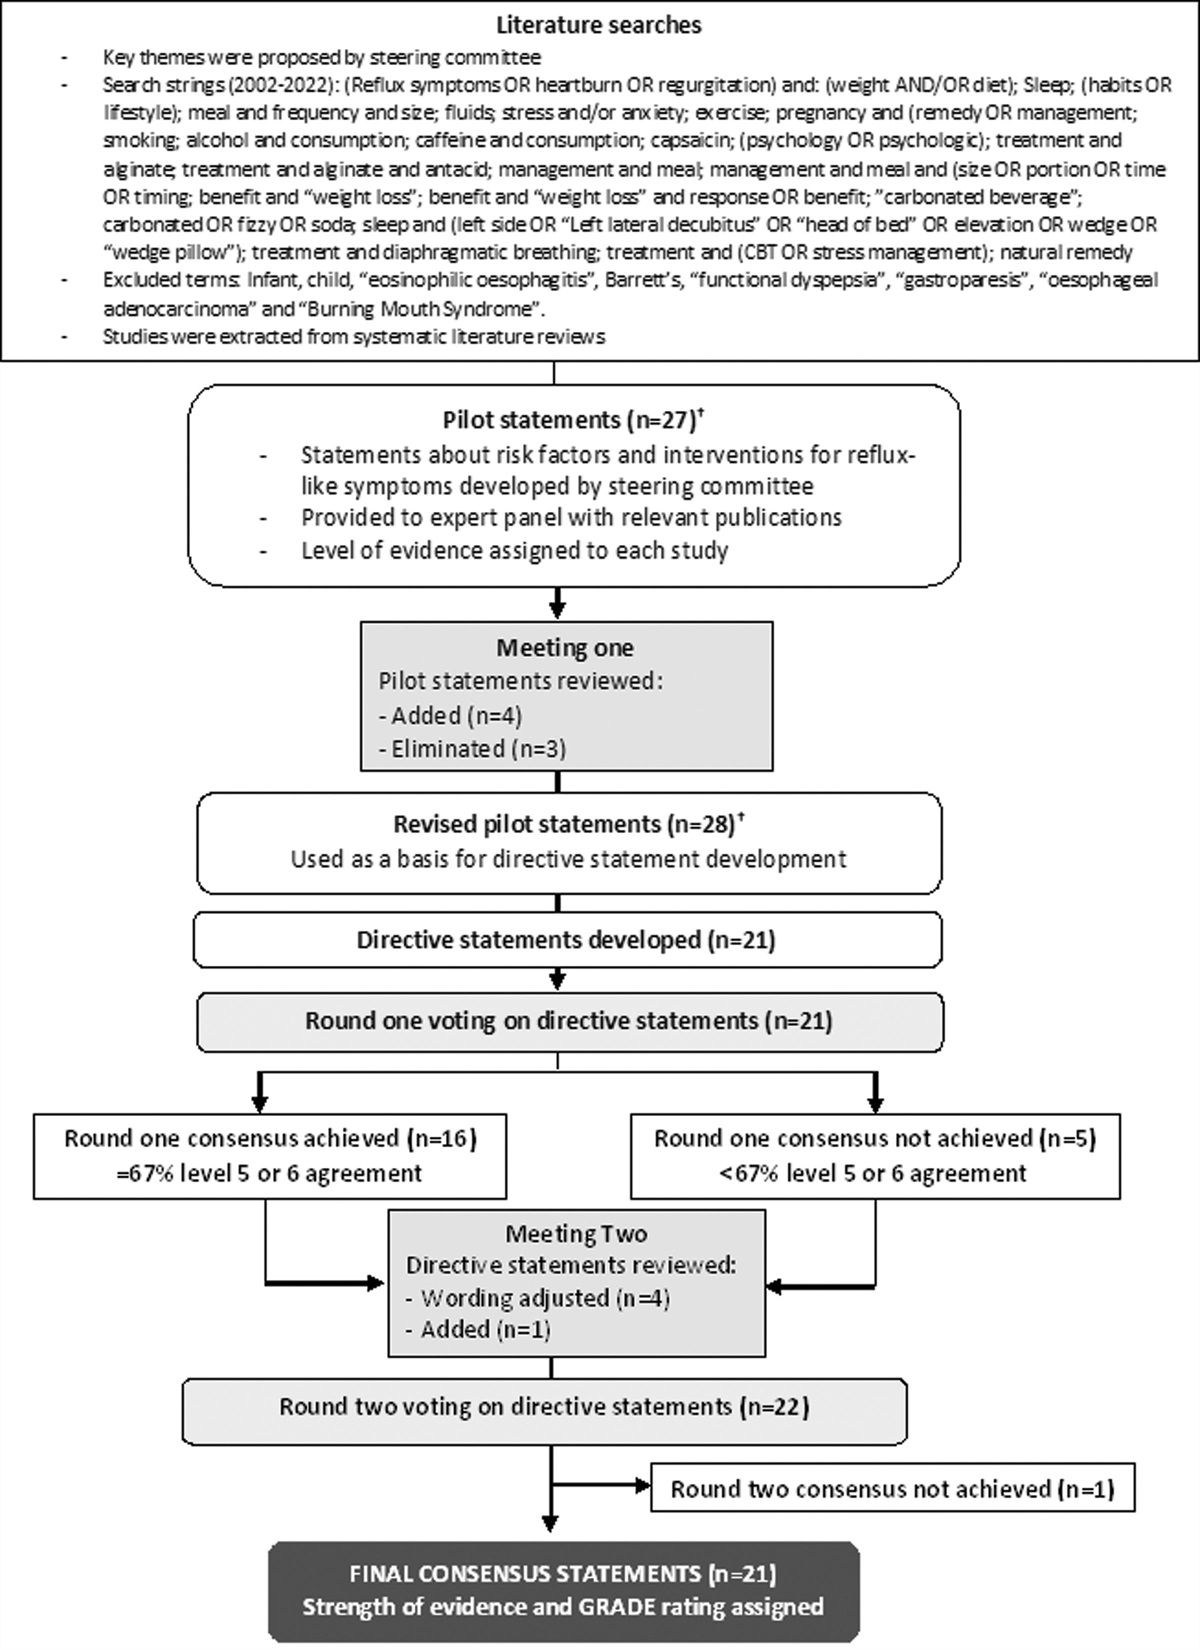 Management advice for patients with reflux-like symptoms: an evidence-based consensus